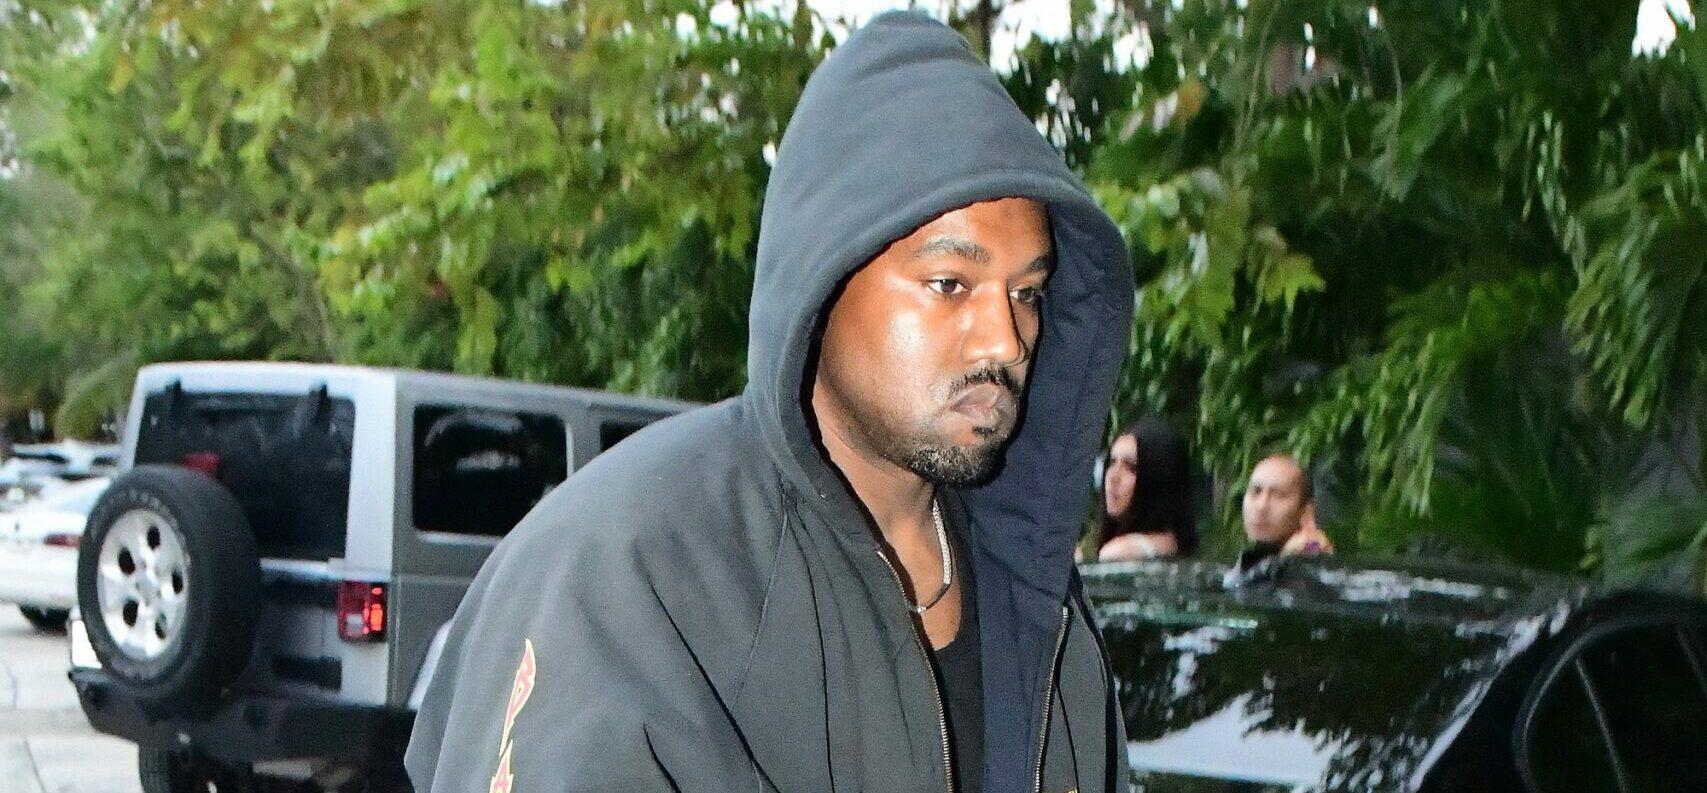 Kanye West is seen for the first time since becoming legally single as he hits up a tattoo shop in Miami